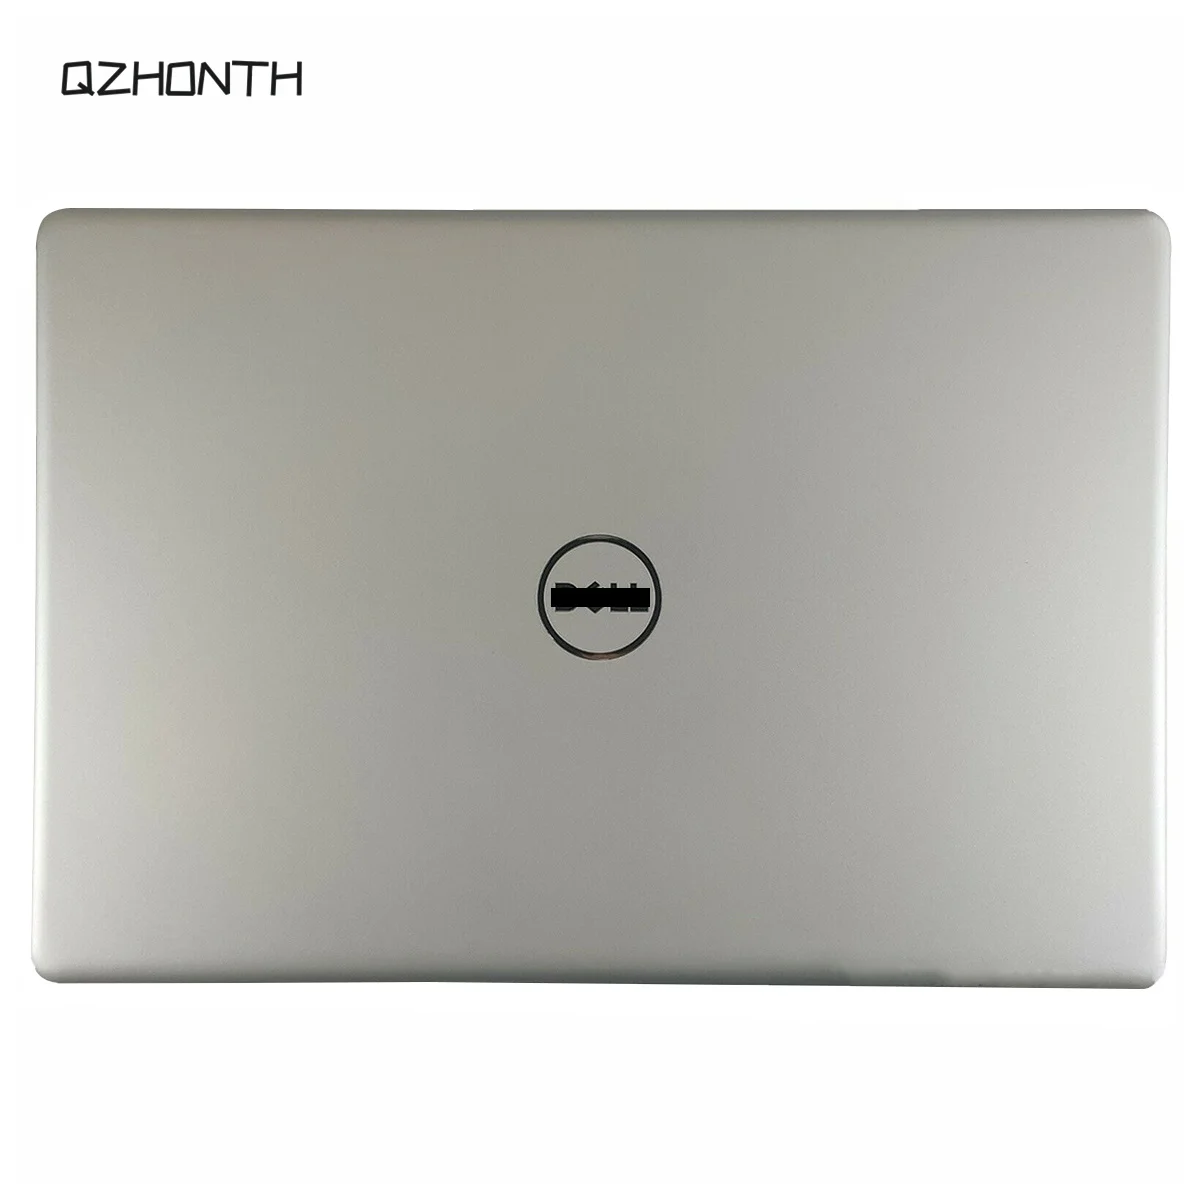 New For Dell Inspiron 15 5000 5593 LCD Back Cover Top Case Rear Lid 032TJM 32TJM Silver 15.6